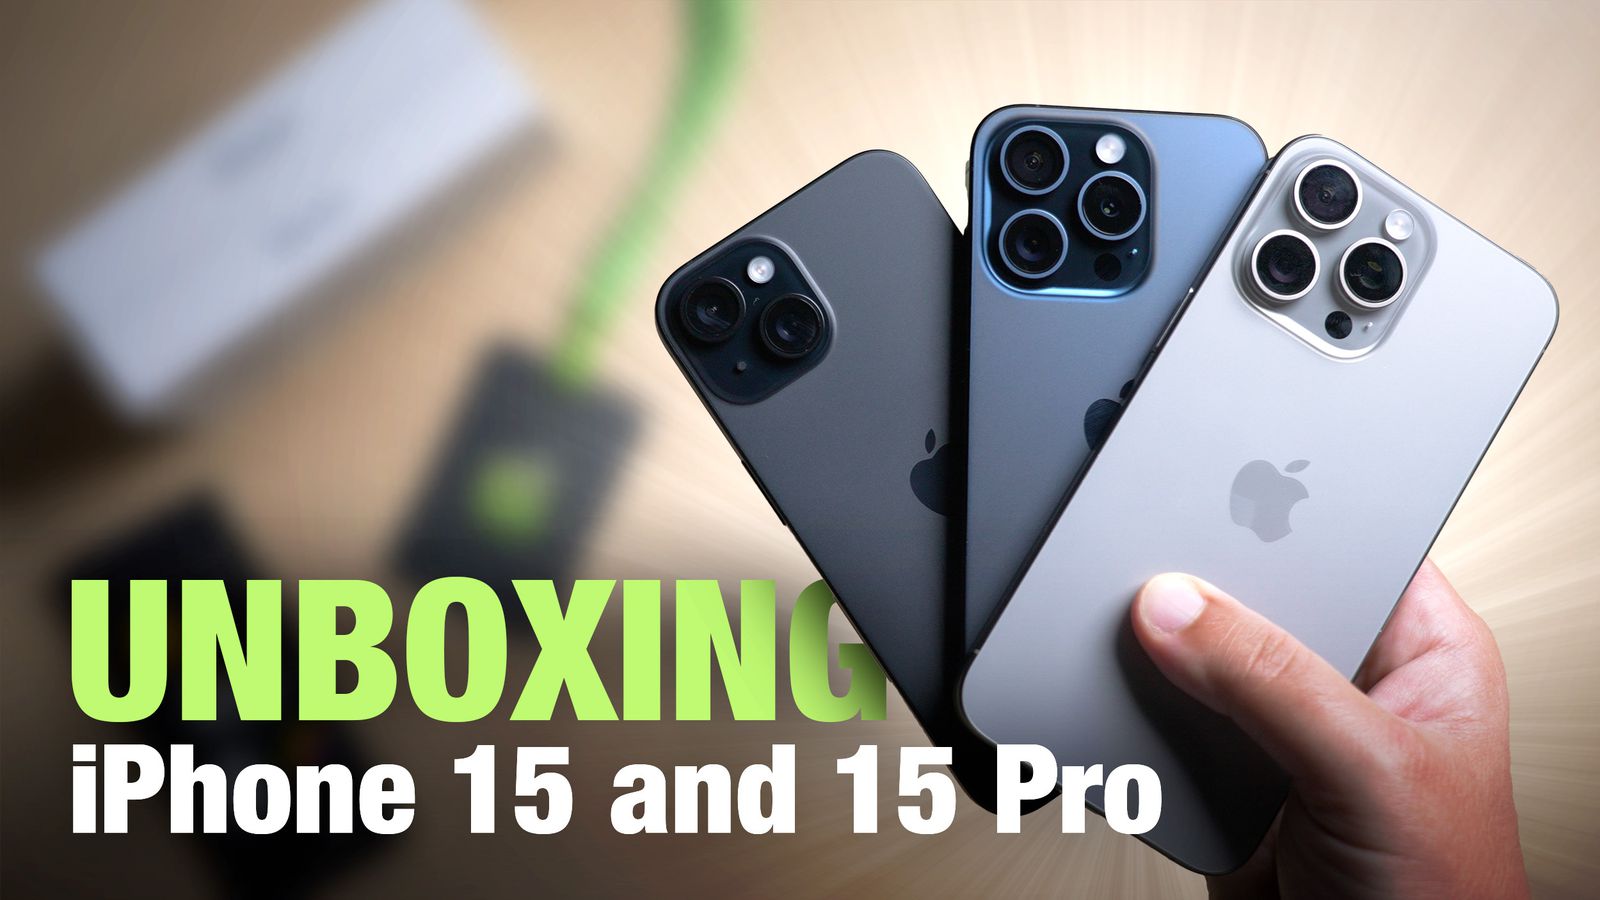 iPhone 15 Pro Max Unboxing .  Iphone apps, Iphone cases, Iphone photography